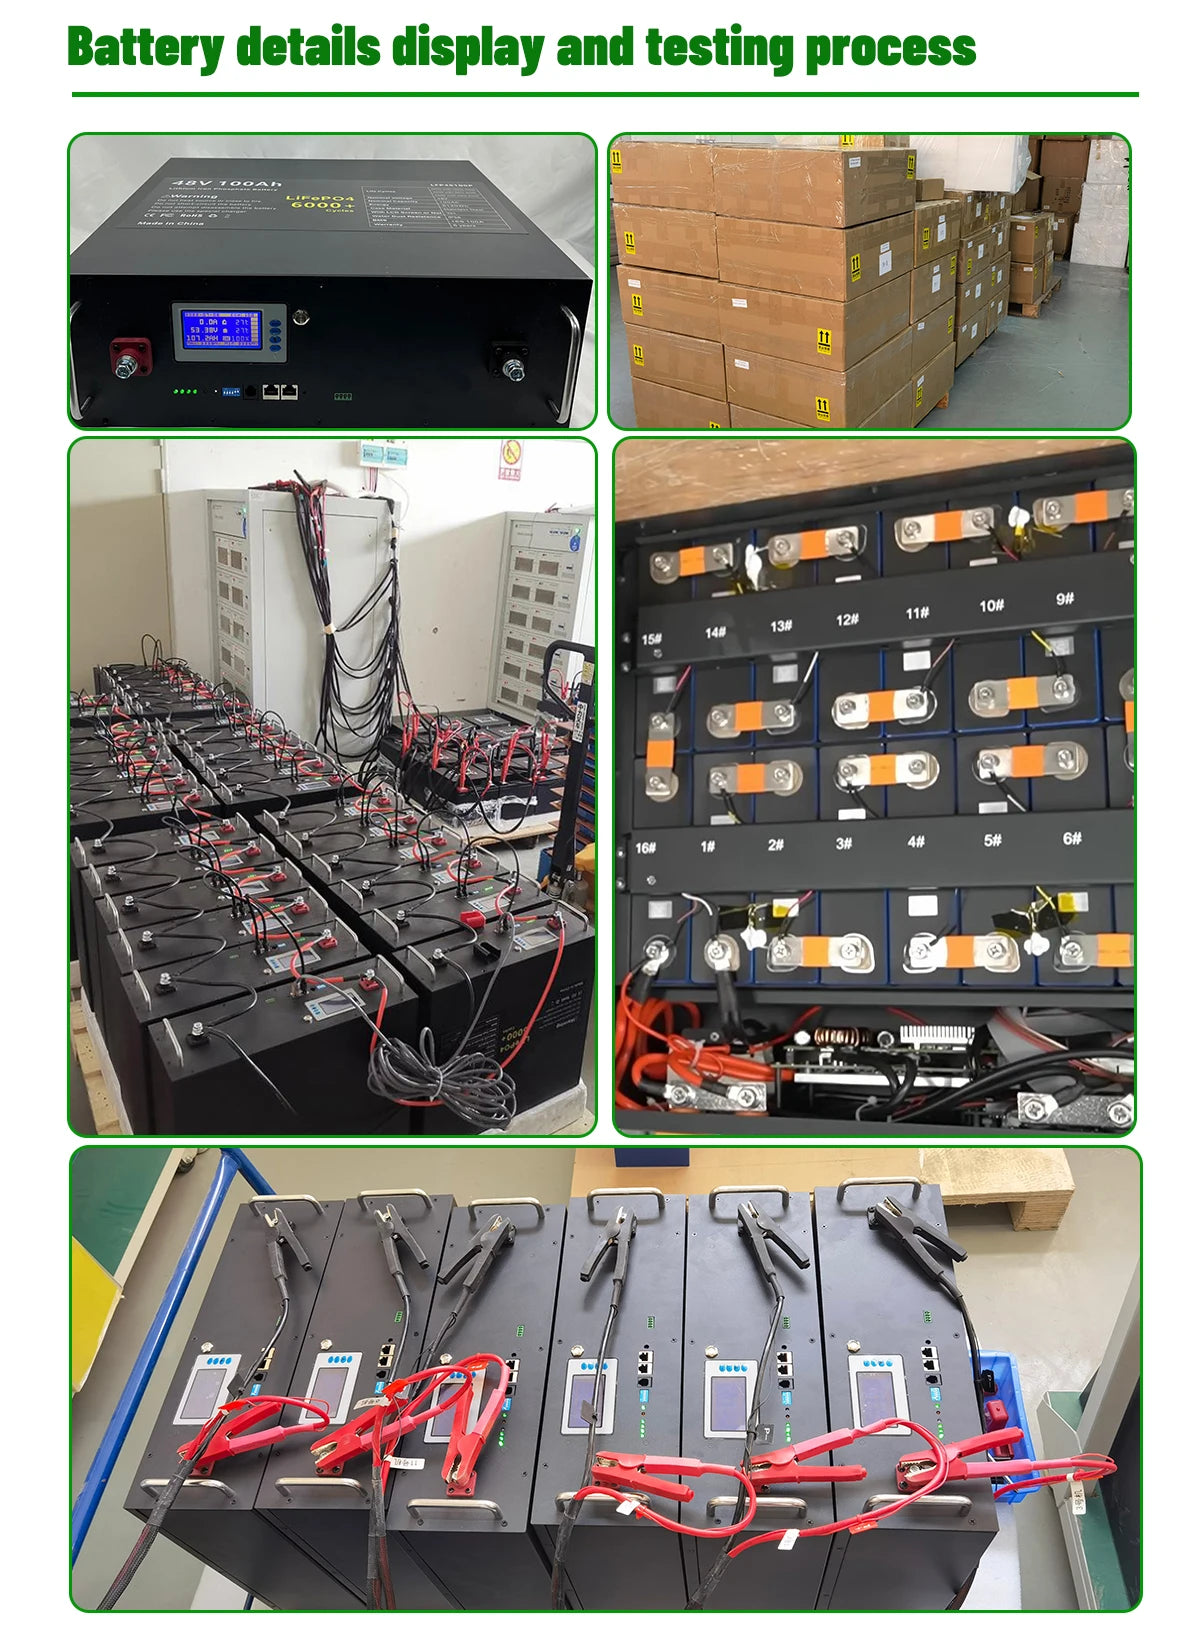 48V LiFePO4 battery pack with 5KW capacity and over 6000 cycles; suitable for inverter applications.